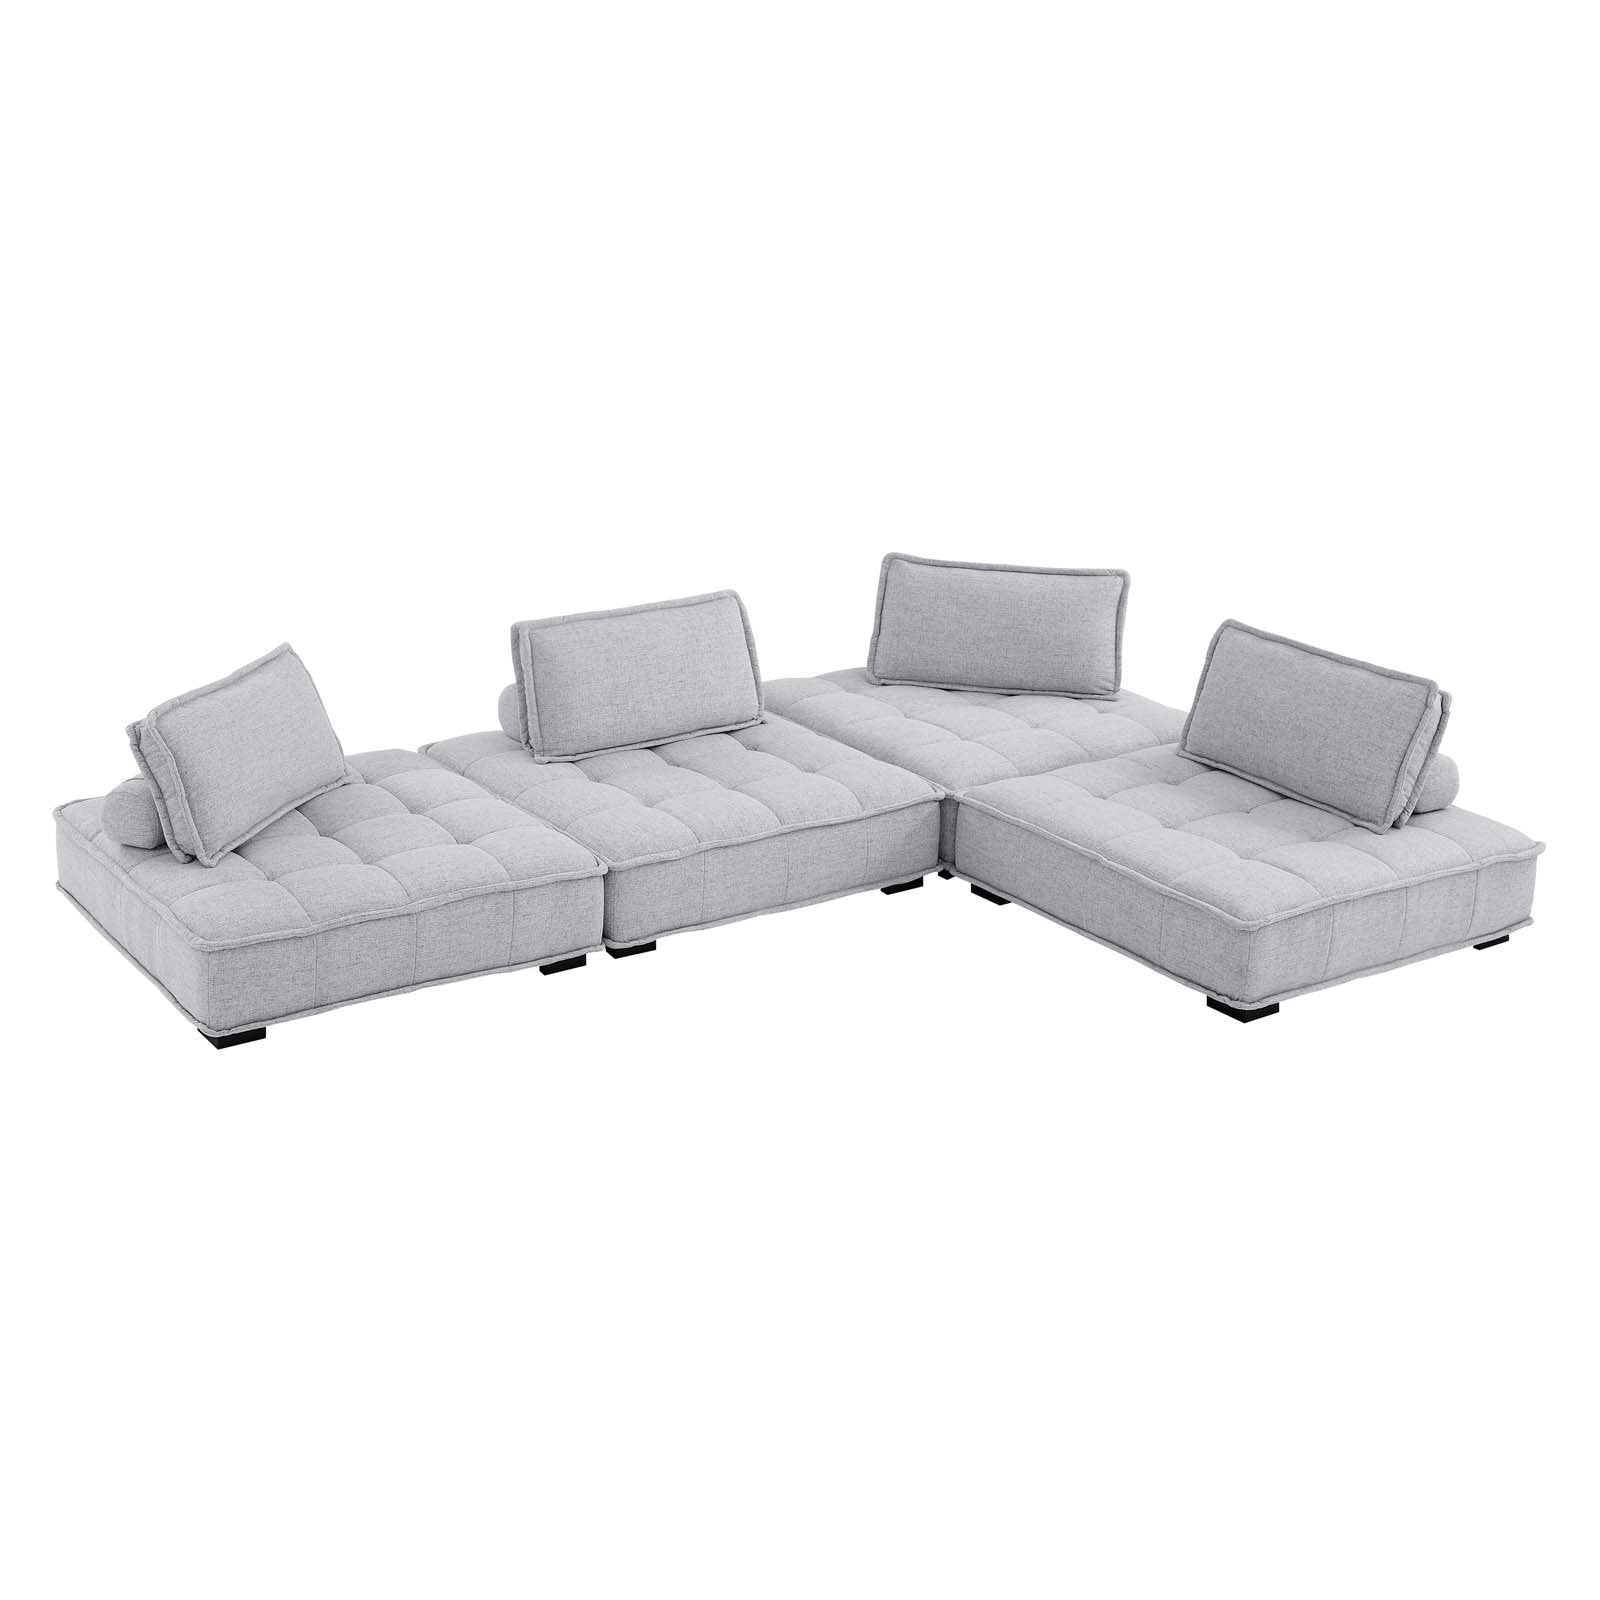 Saunter Tufted Fabric 4-Piece Sectional Sofa - East Shore Modern Home Furnishings